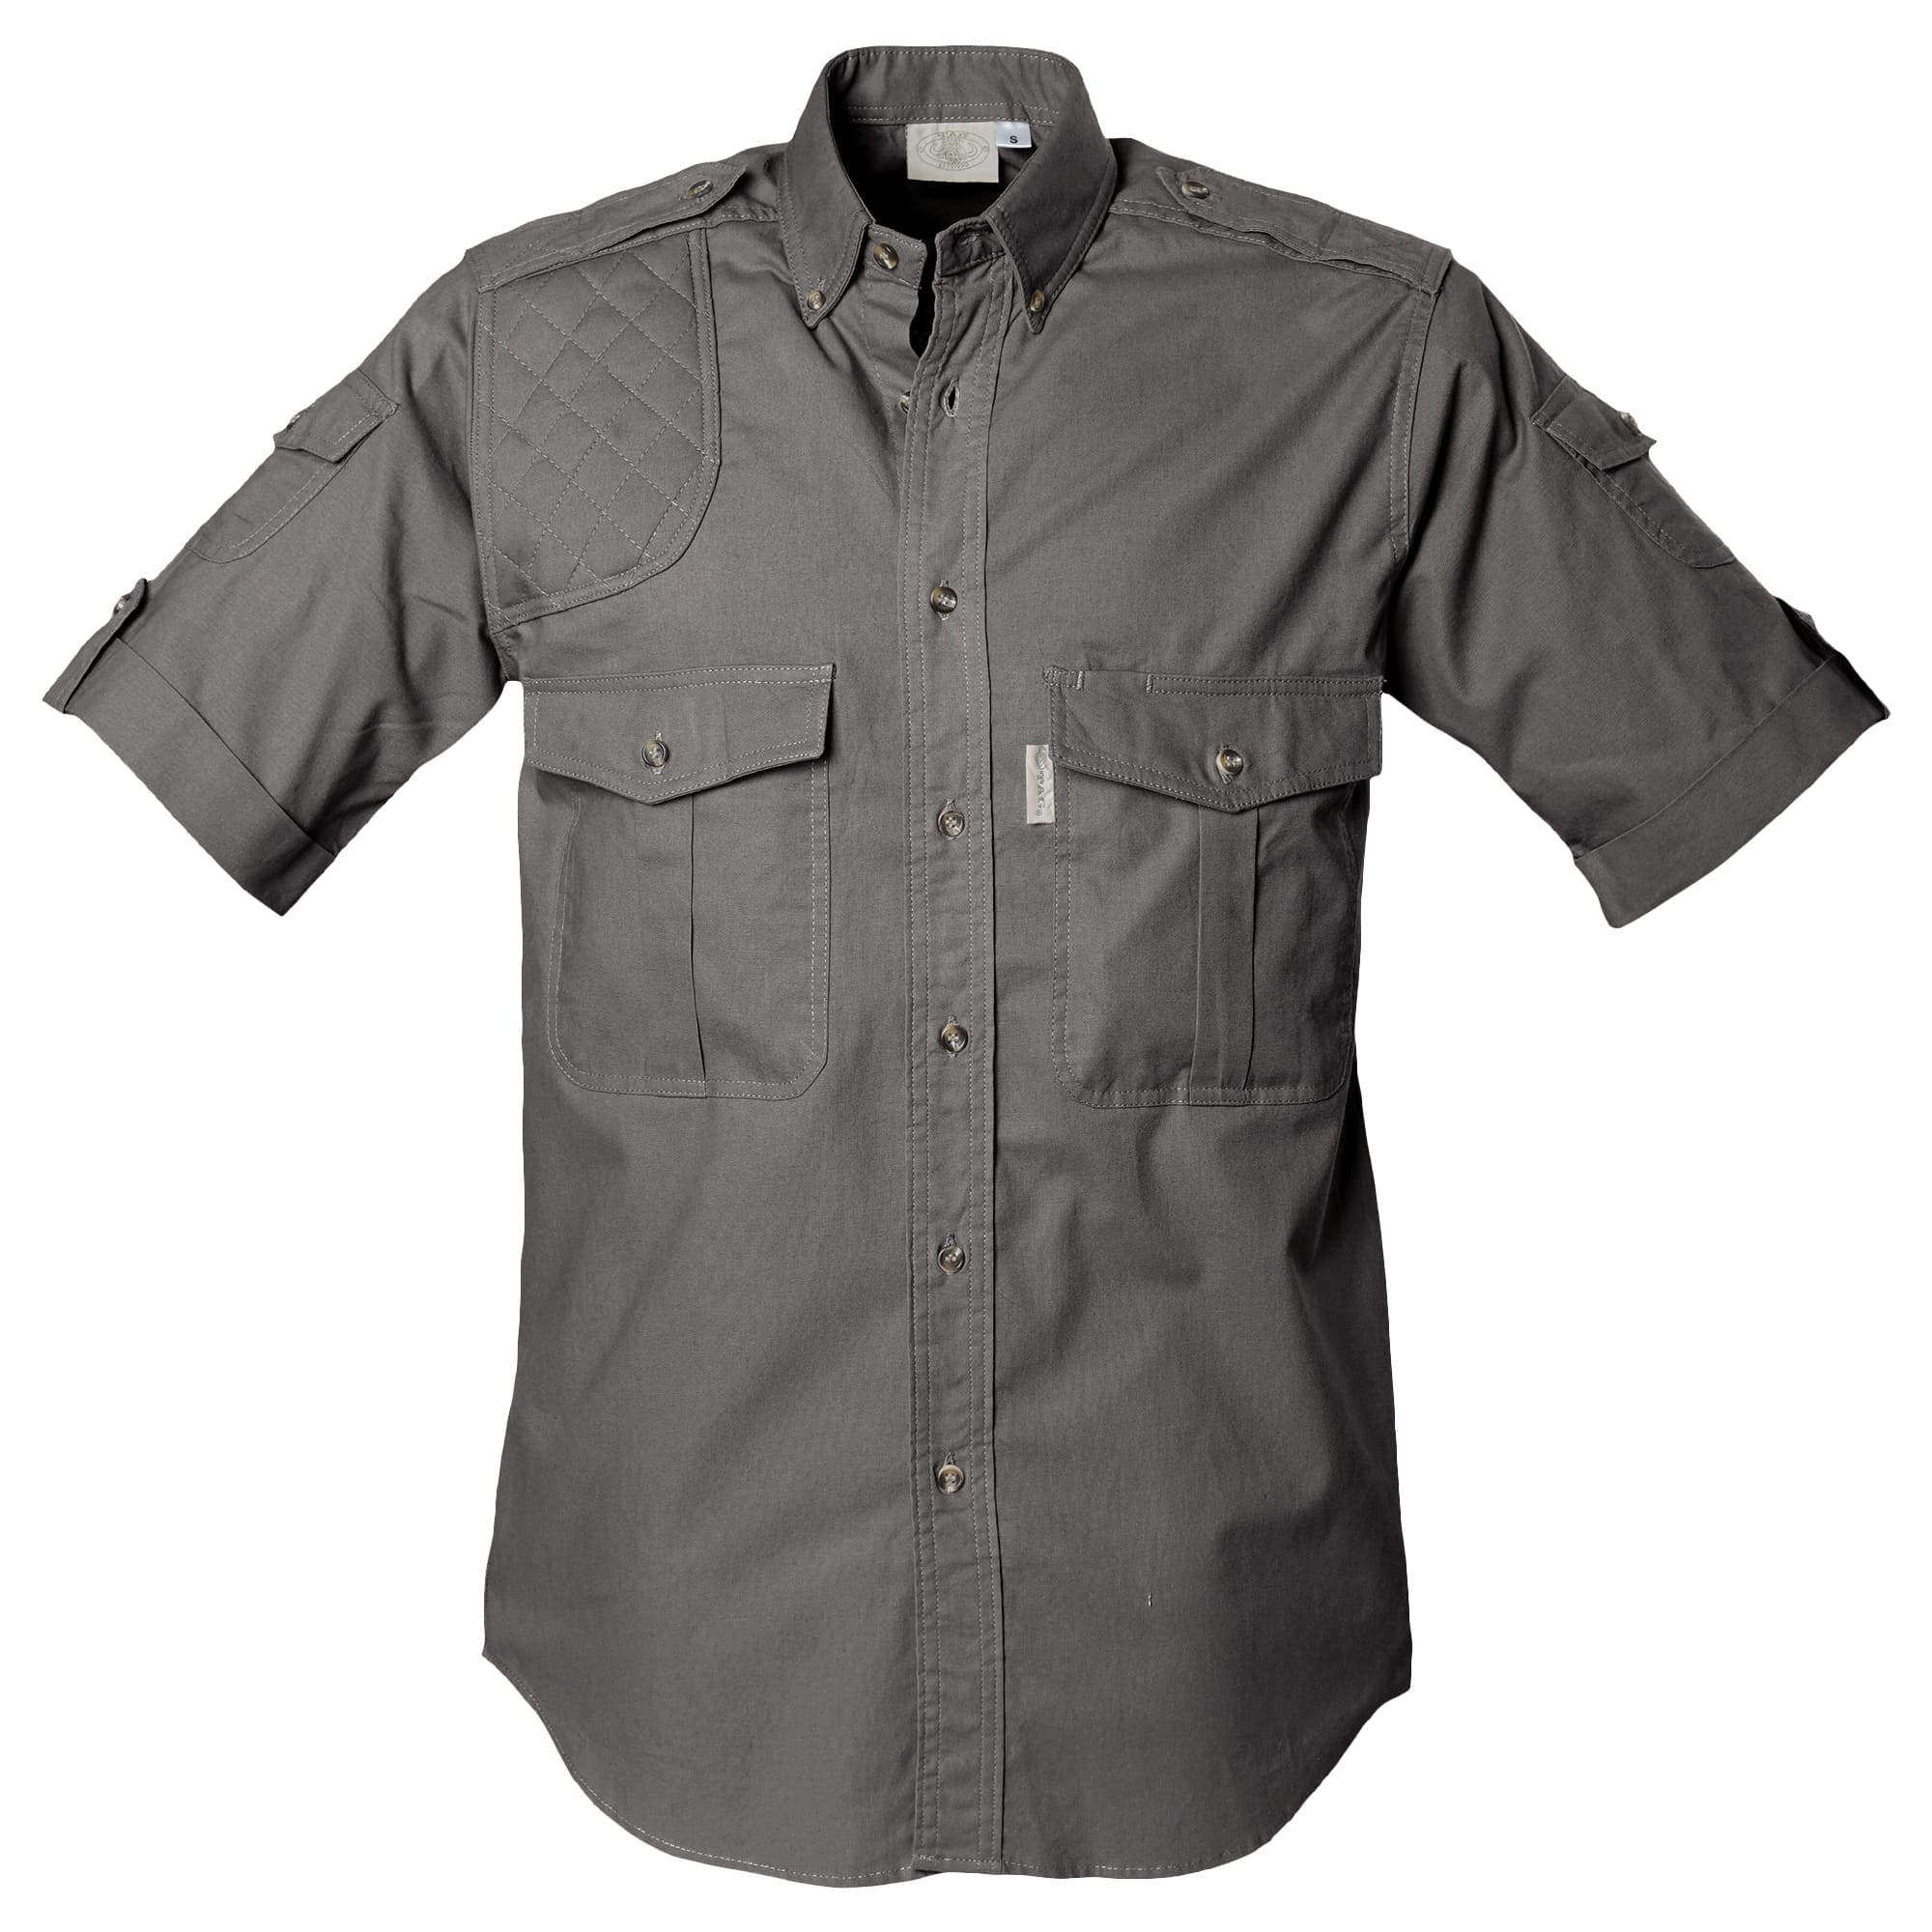 Tag Safari Shooter Shirt for Men Short Sleeve, 100% Cotton, Sun Protection for Outdoor Adventures (Olive, X-Large)